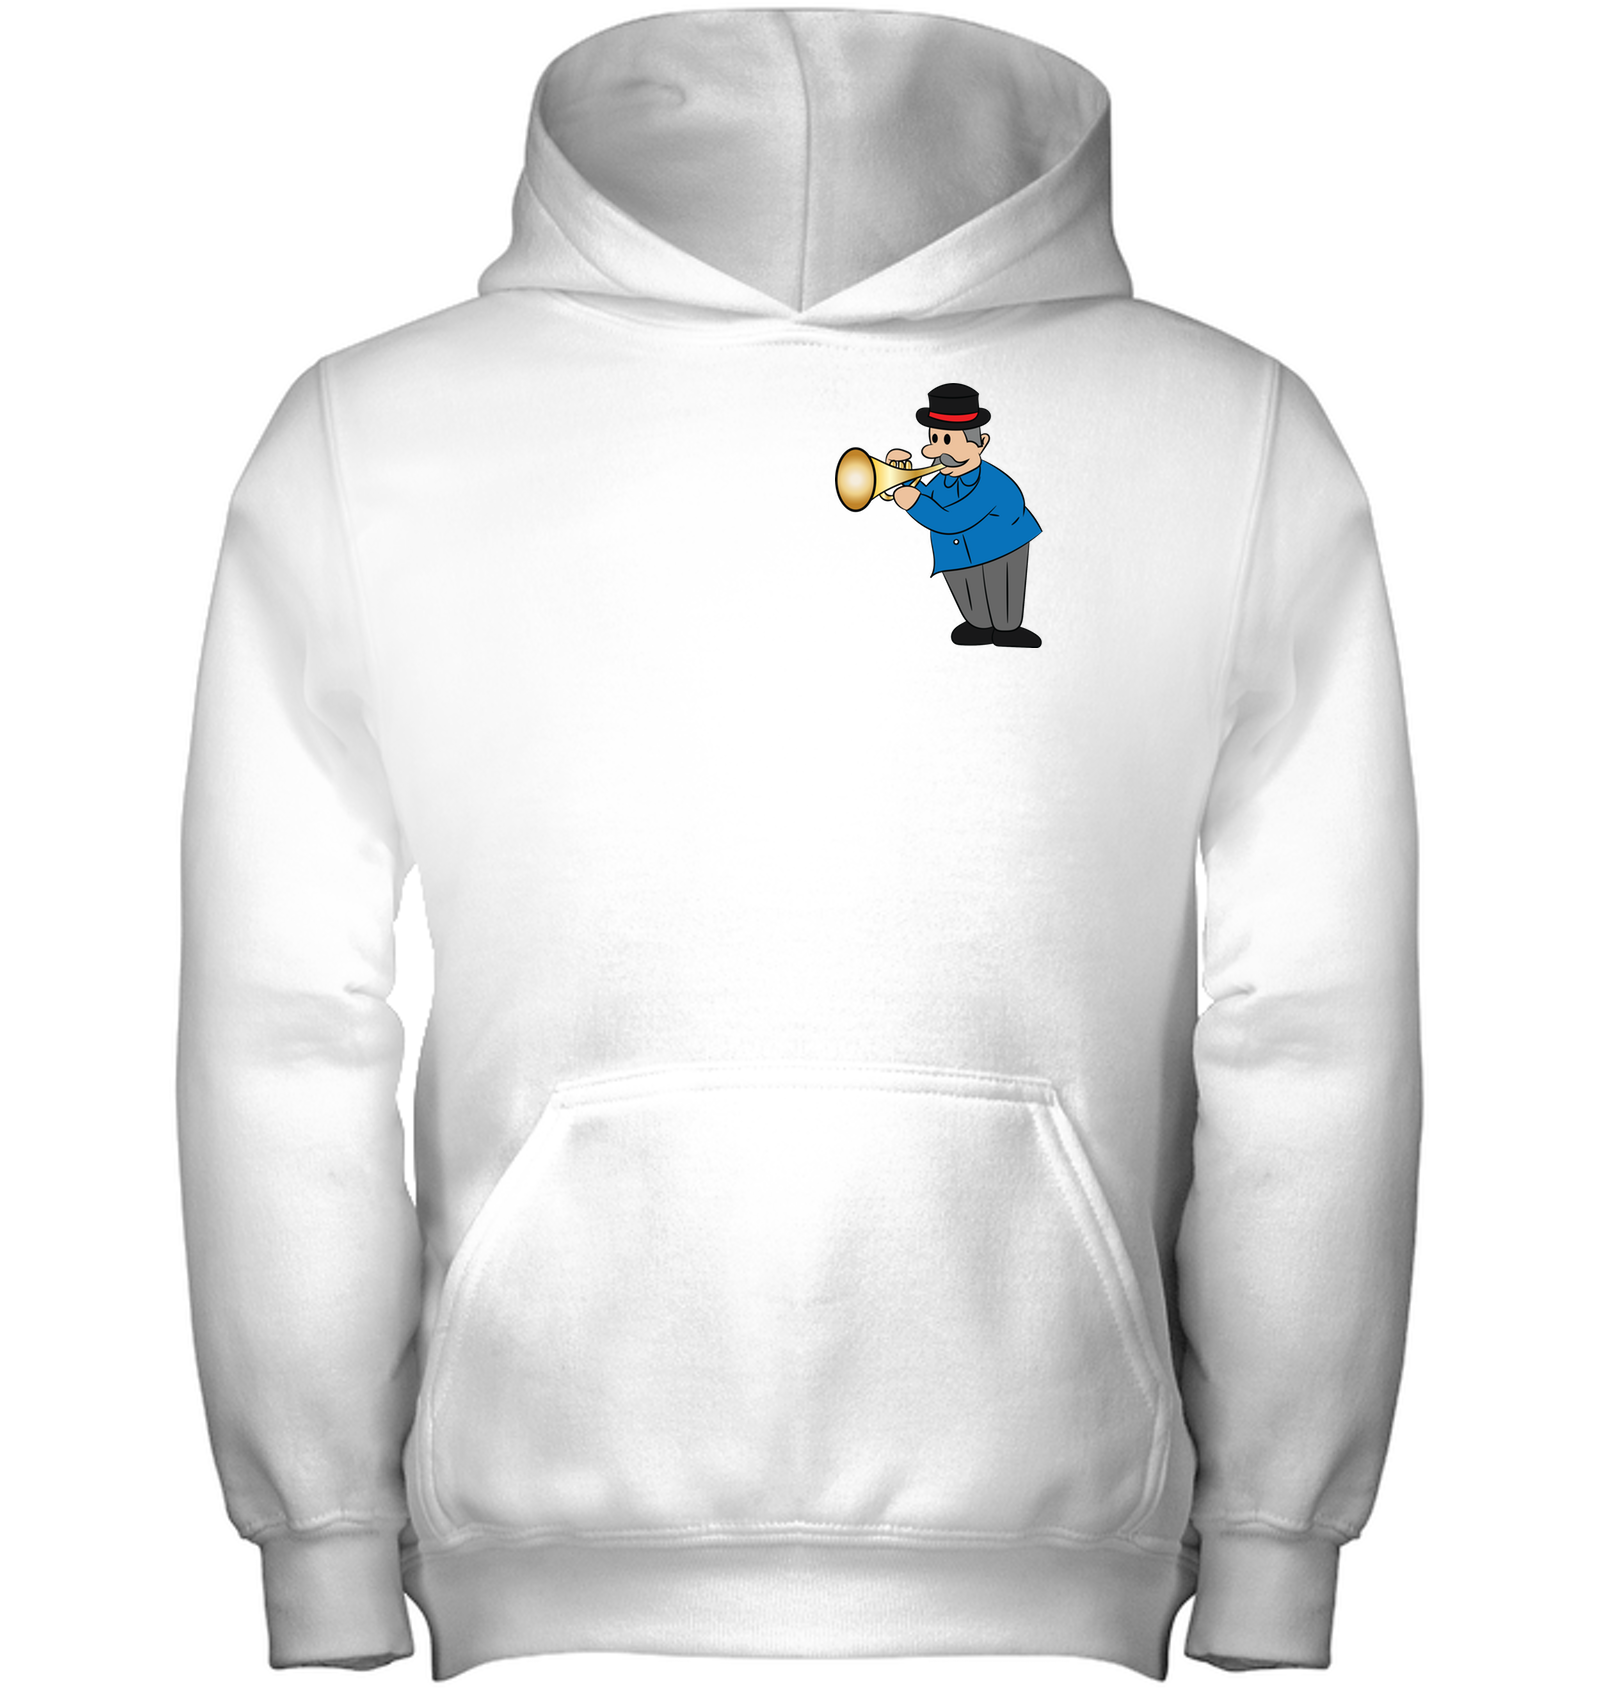 Man with Trumpet (Pocket Size) - Gildan Youth Heavyweight Pullover Hoodie